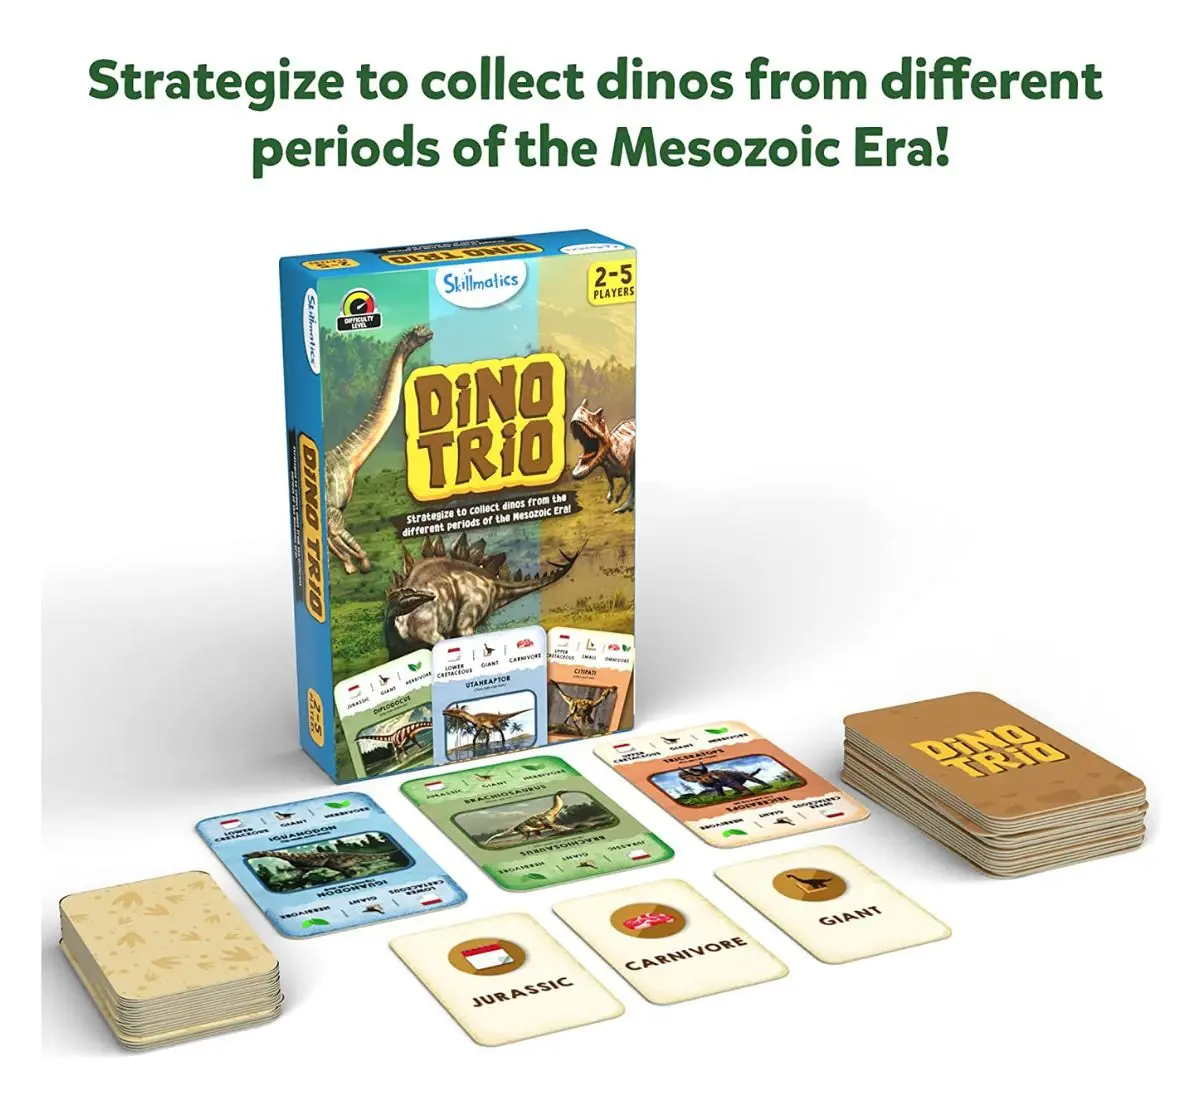 Skillmatics Ultimate Dinosaur Game Box - 3 Family Friendly Games in 1, Perfect for Kids Ages 5 and Up, Multicolour